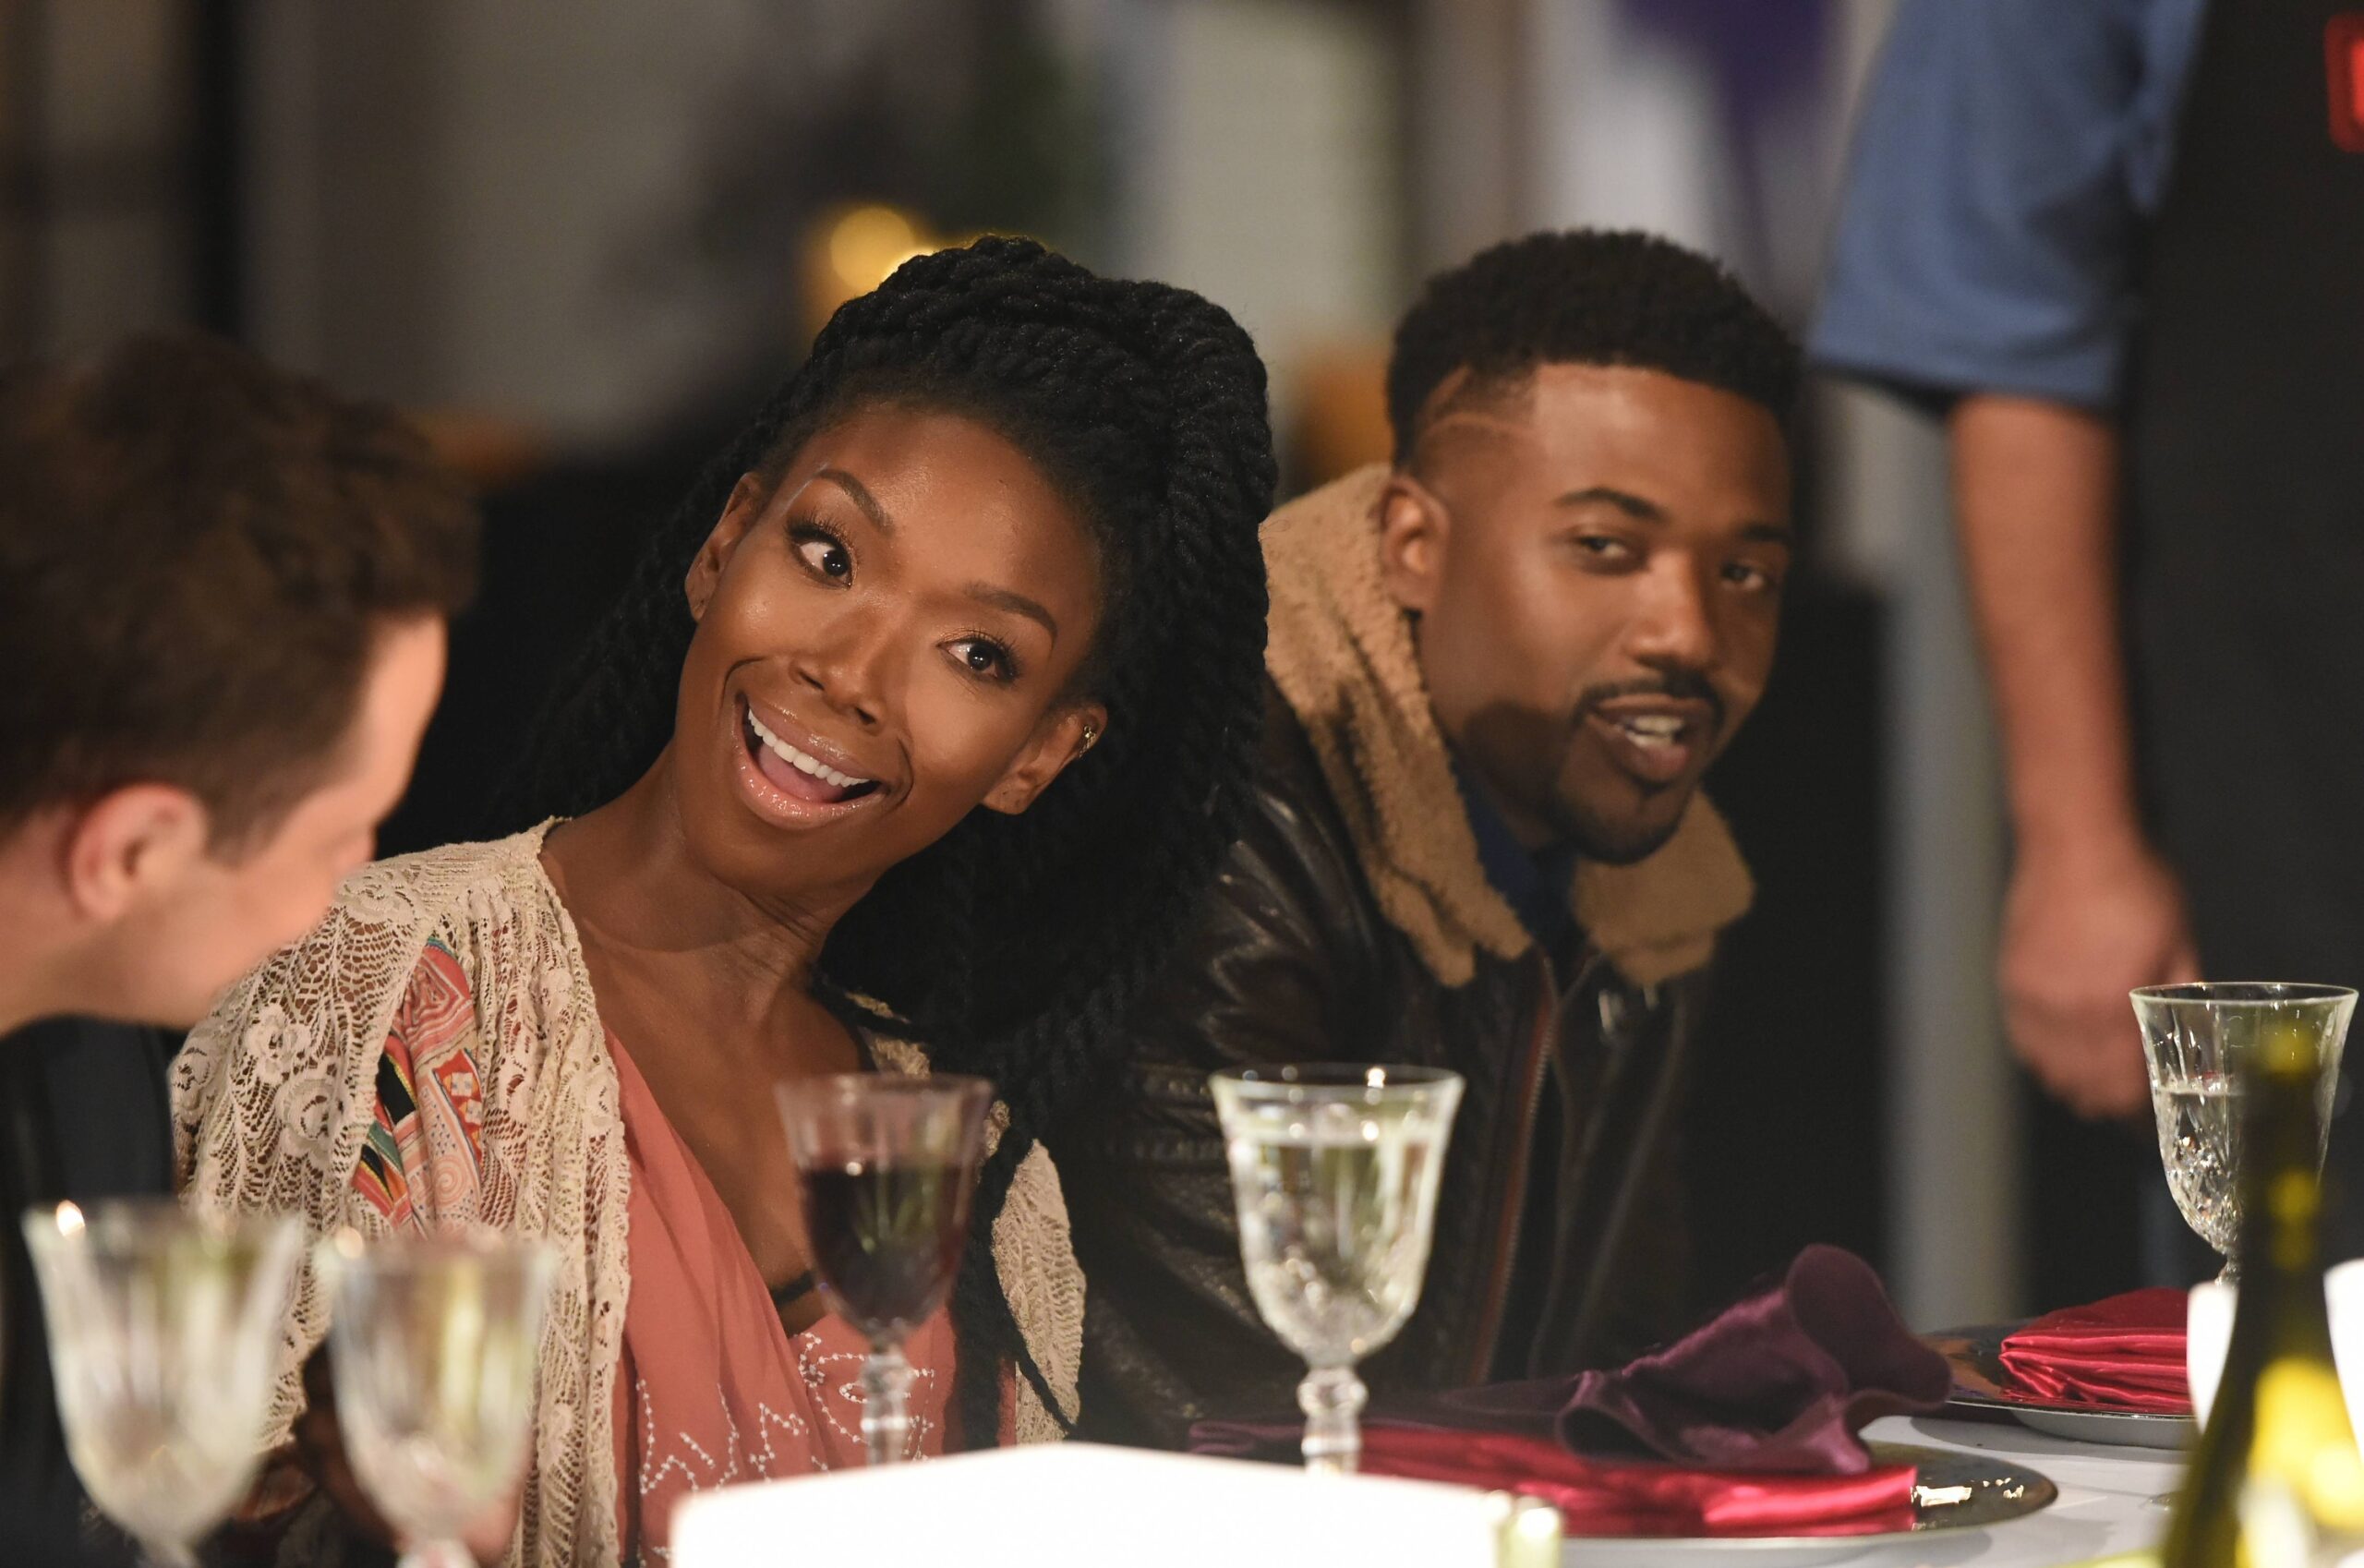 Brandy Calls Out Ray J for Deleting Her Comments on Instagram and Ignoring Her Advice Ahead of ‘Verzuz’ Battle